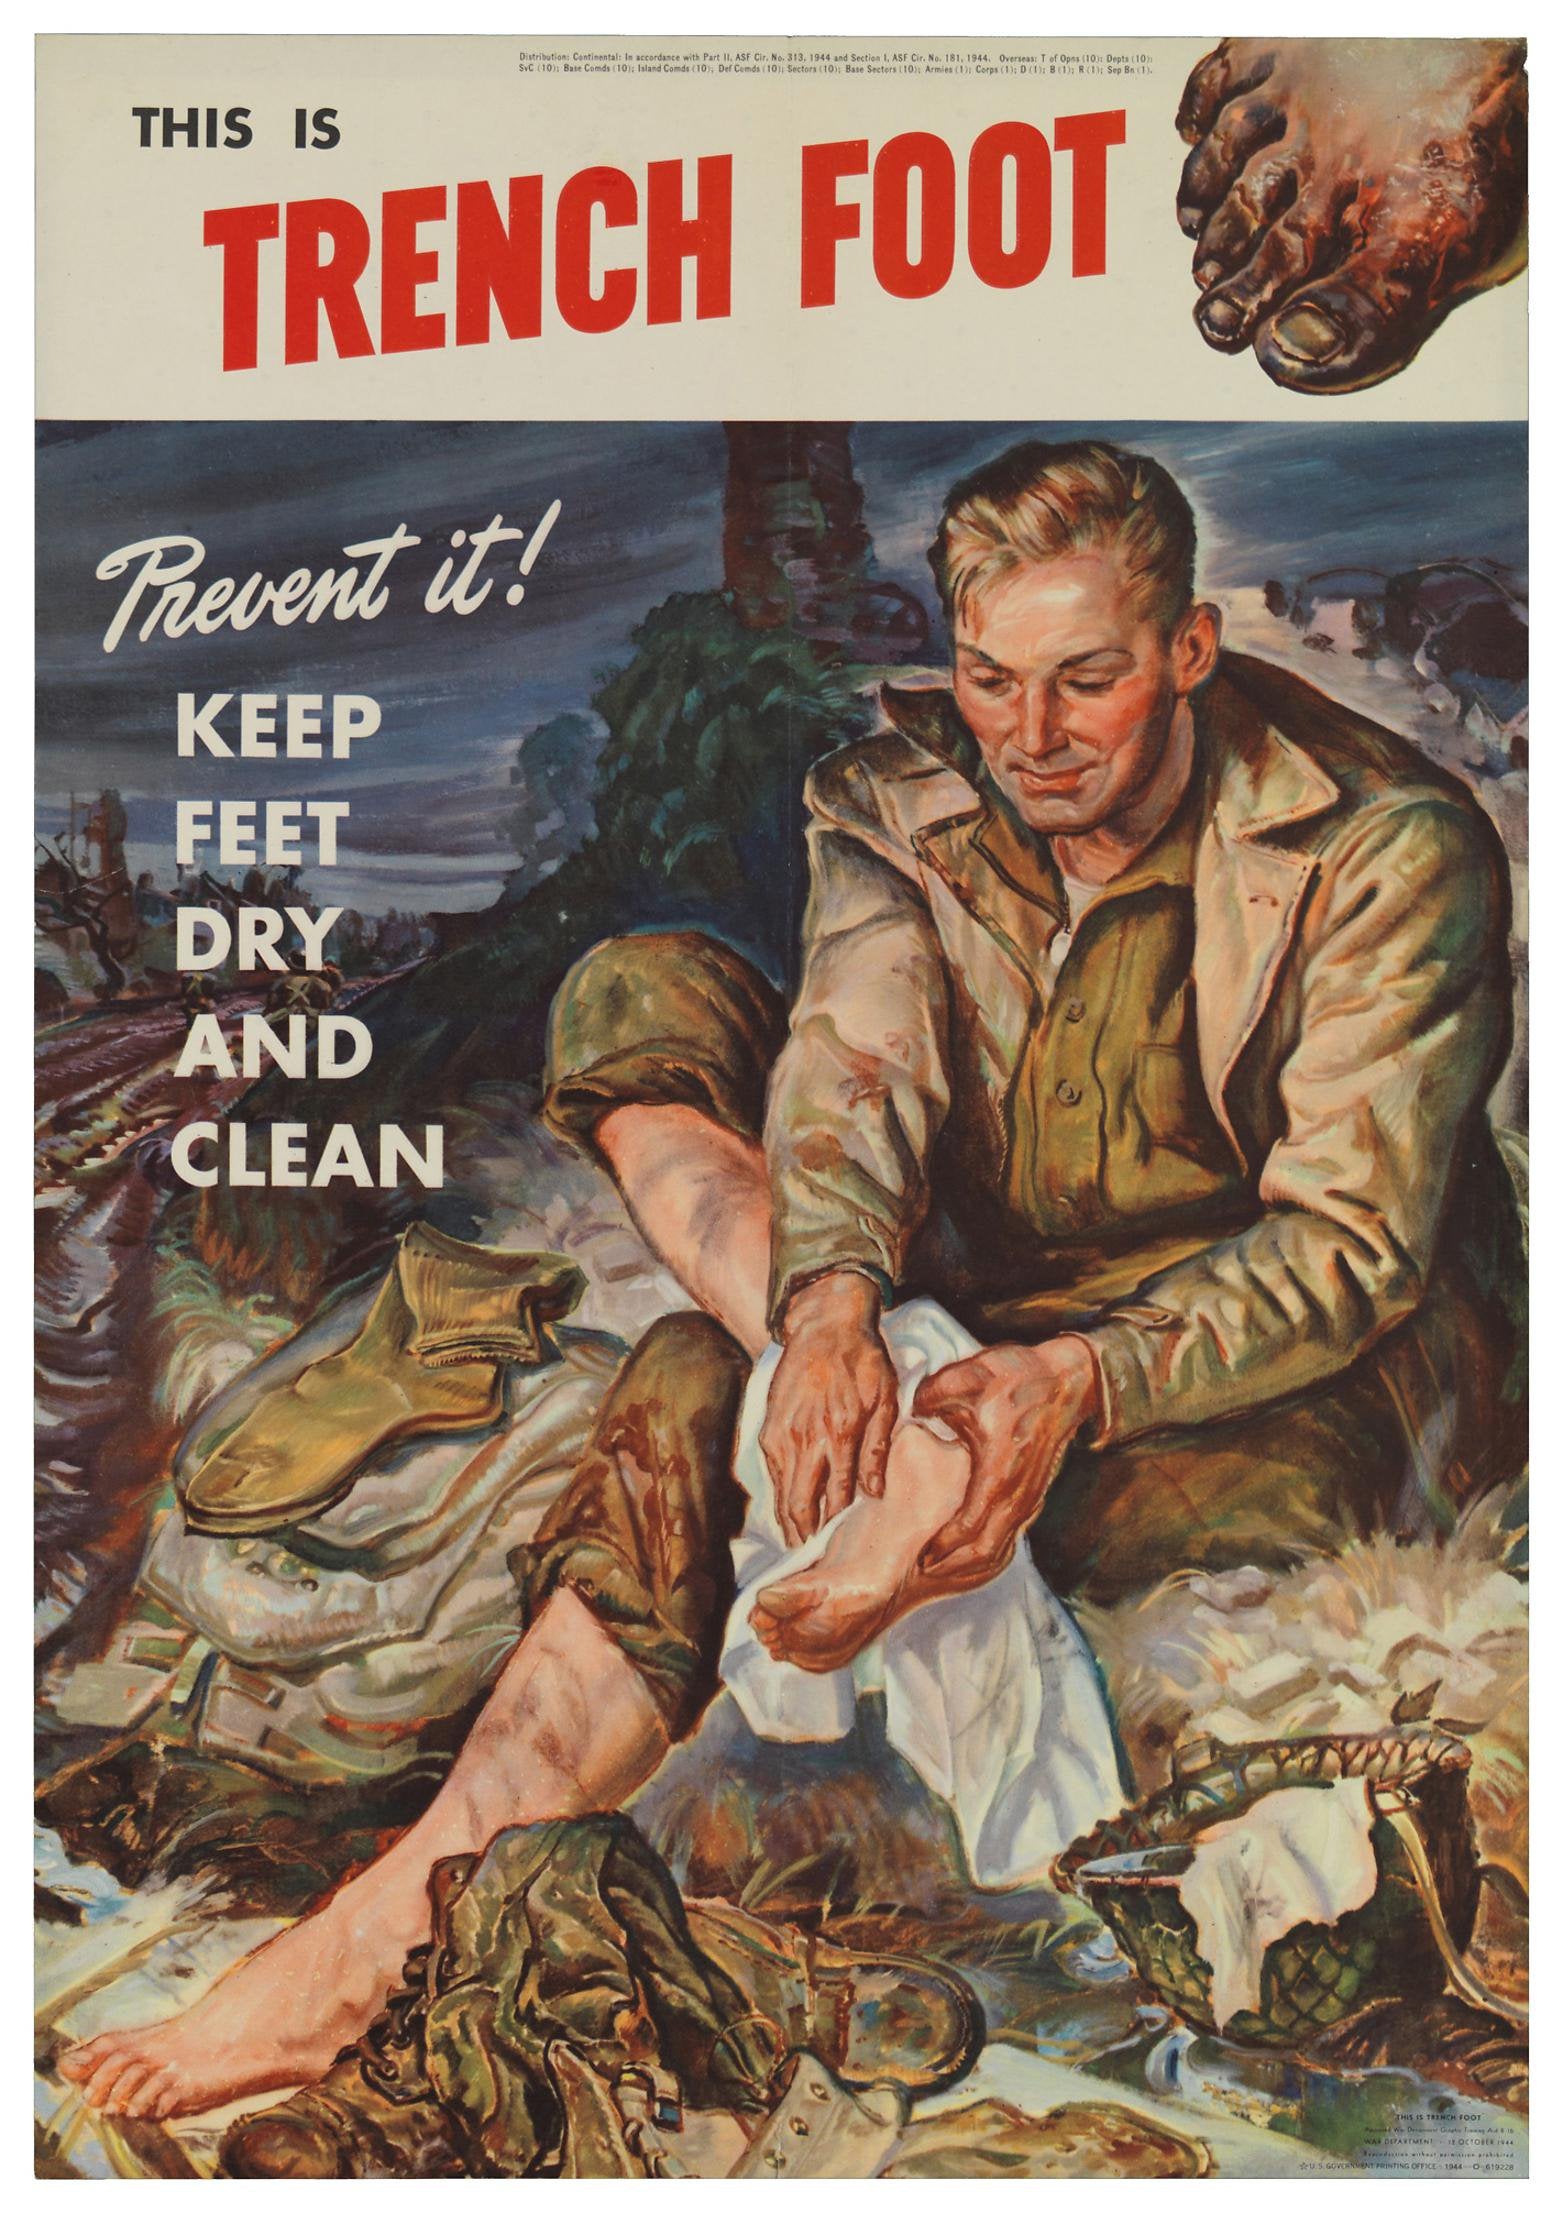 A WWI poster about trench foot showing. a soldier keeping his feet clean and dry